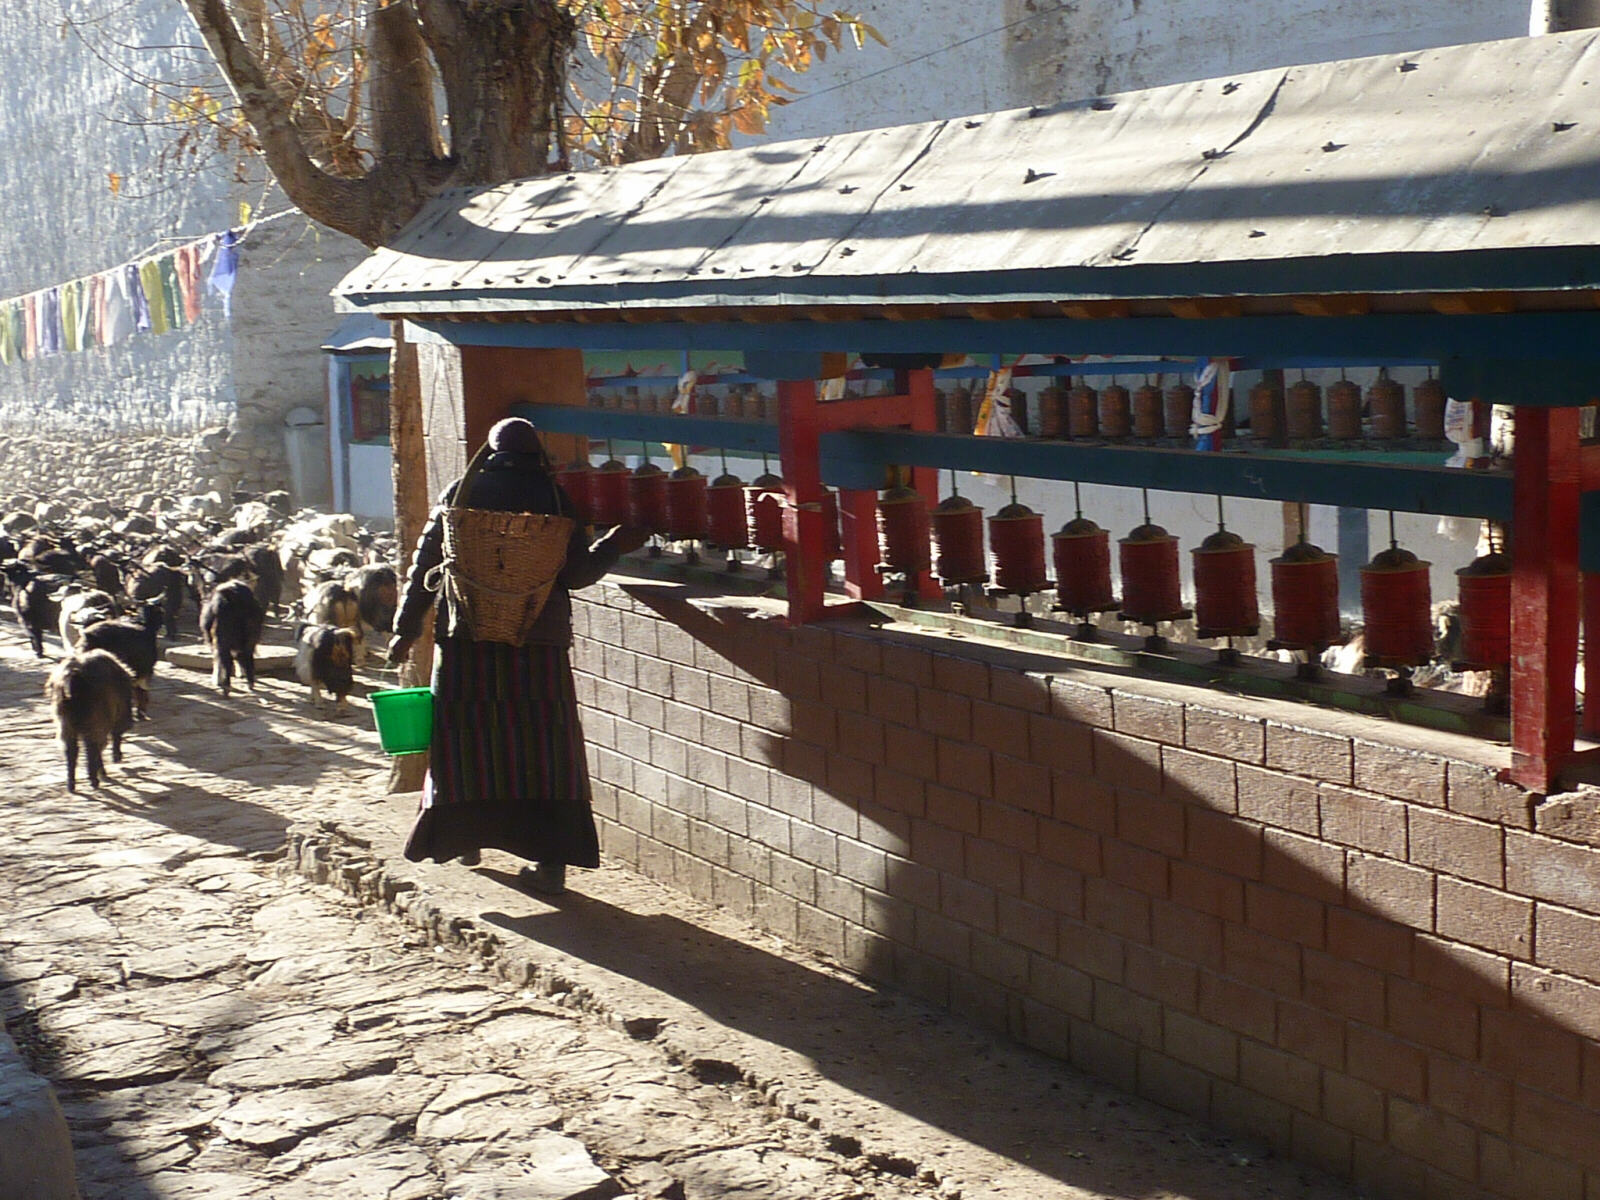 A goatherd spinning prayer wheels at Lo Manthang, Nepal